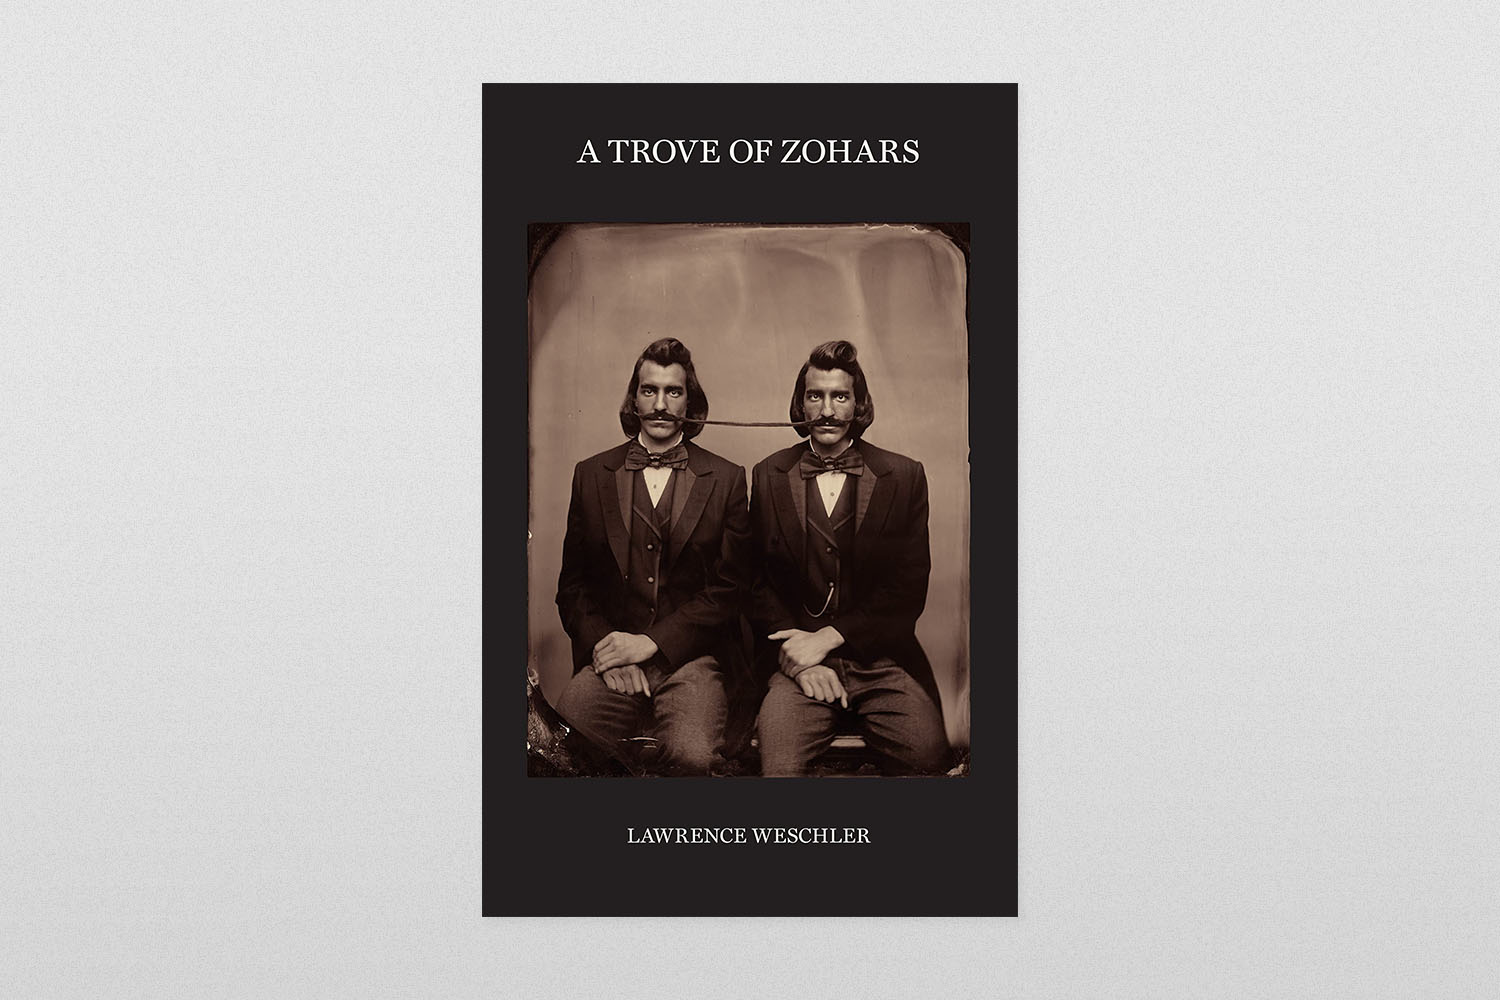 A Trove of Zohars by Lawrence Weschler